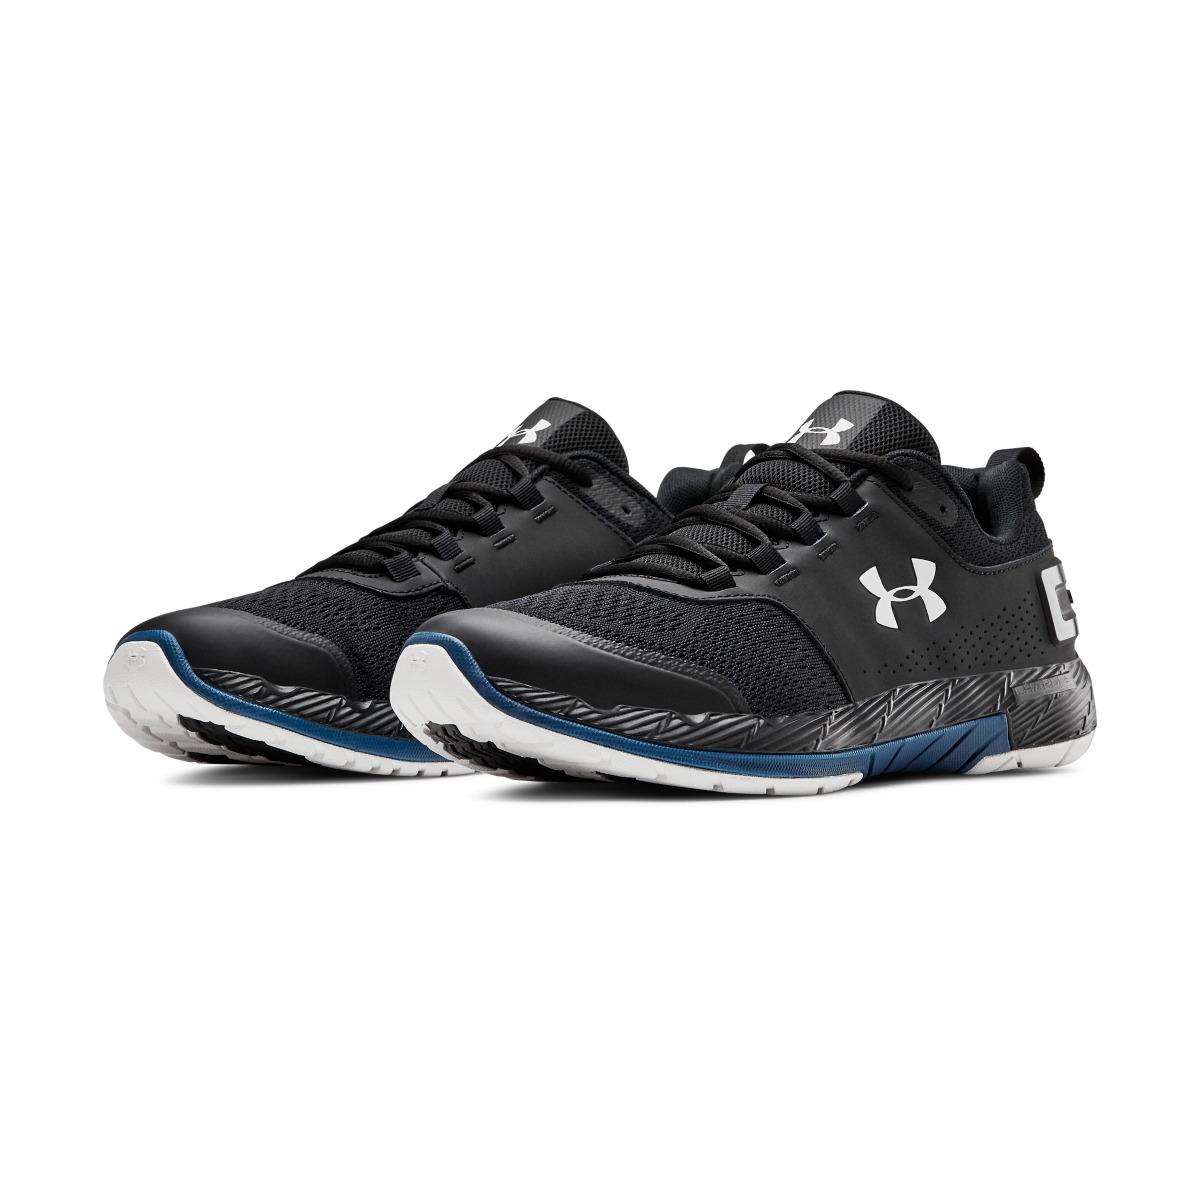 Lyst Under Armour Commit Tr Ex Fitnesscross Training Shoes In Black